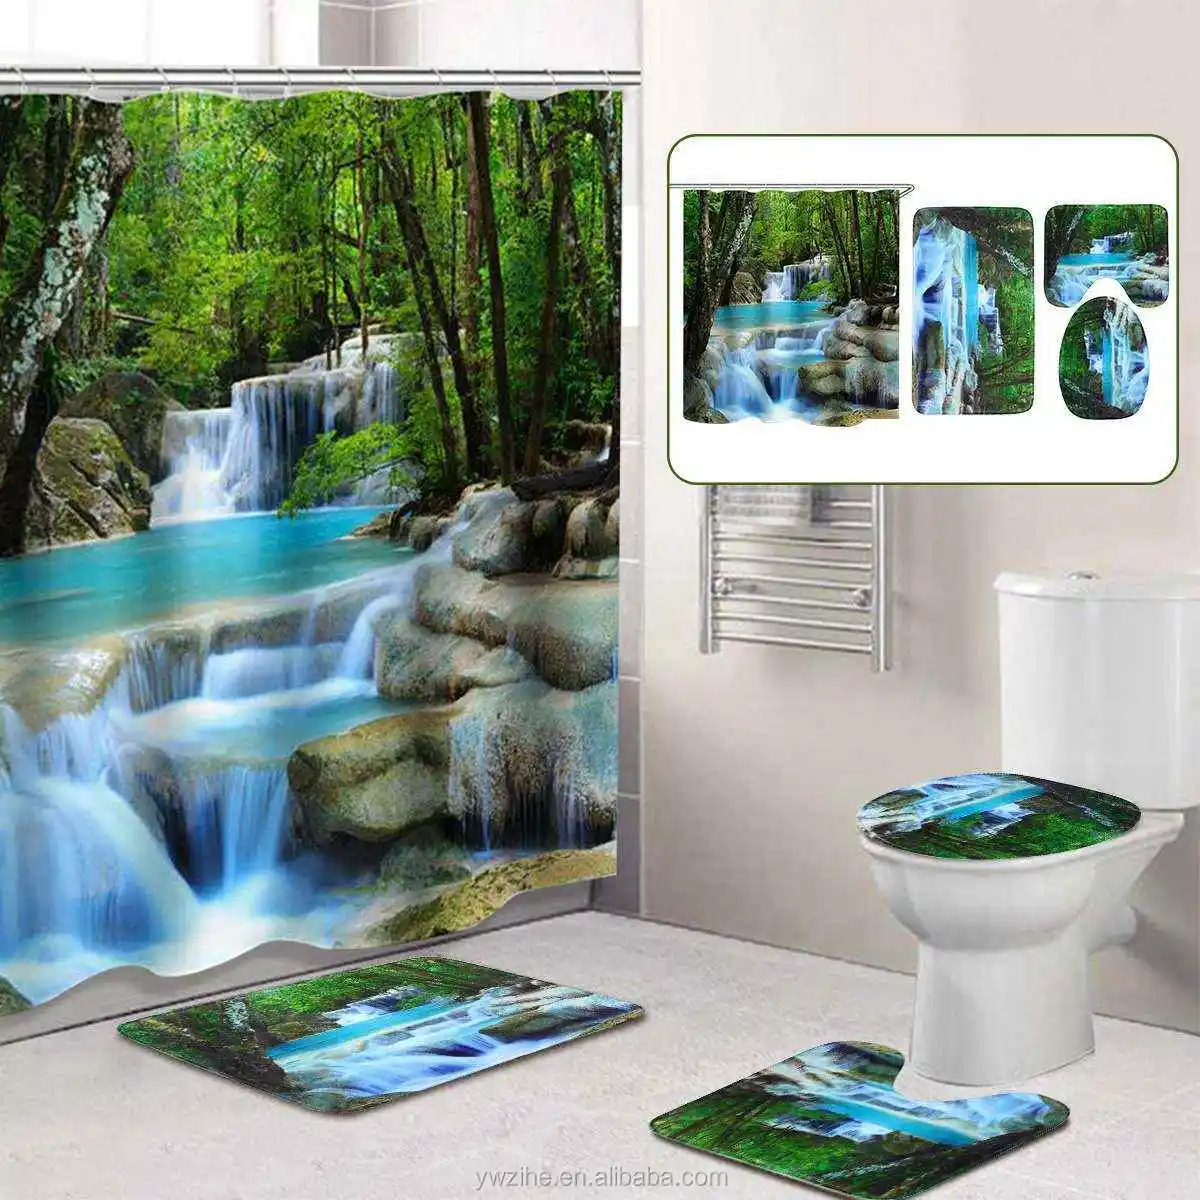 Green Forest Waterfall Bath Mat Toilet Cover Rugs Shower Curtain Bathroom Set 